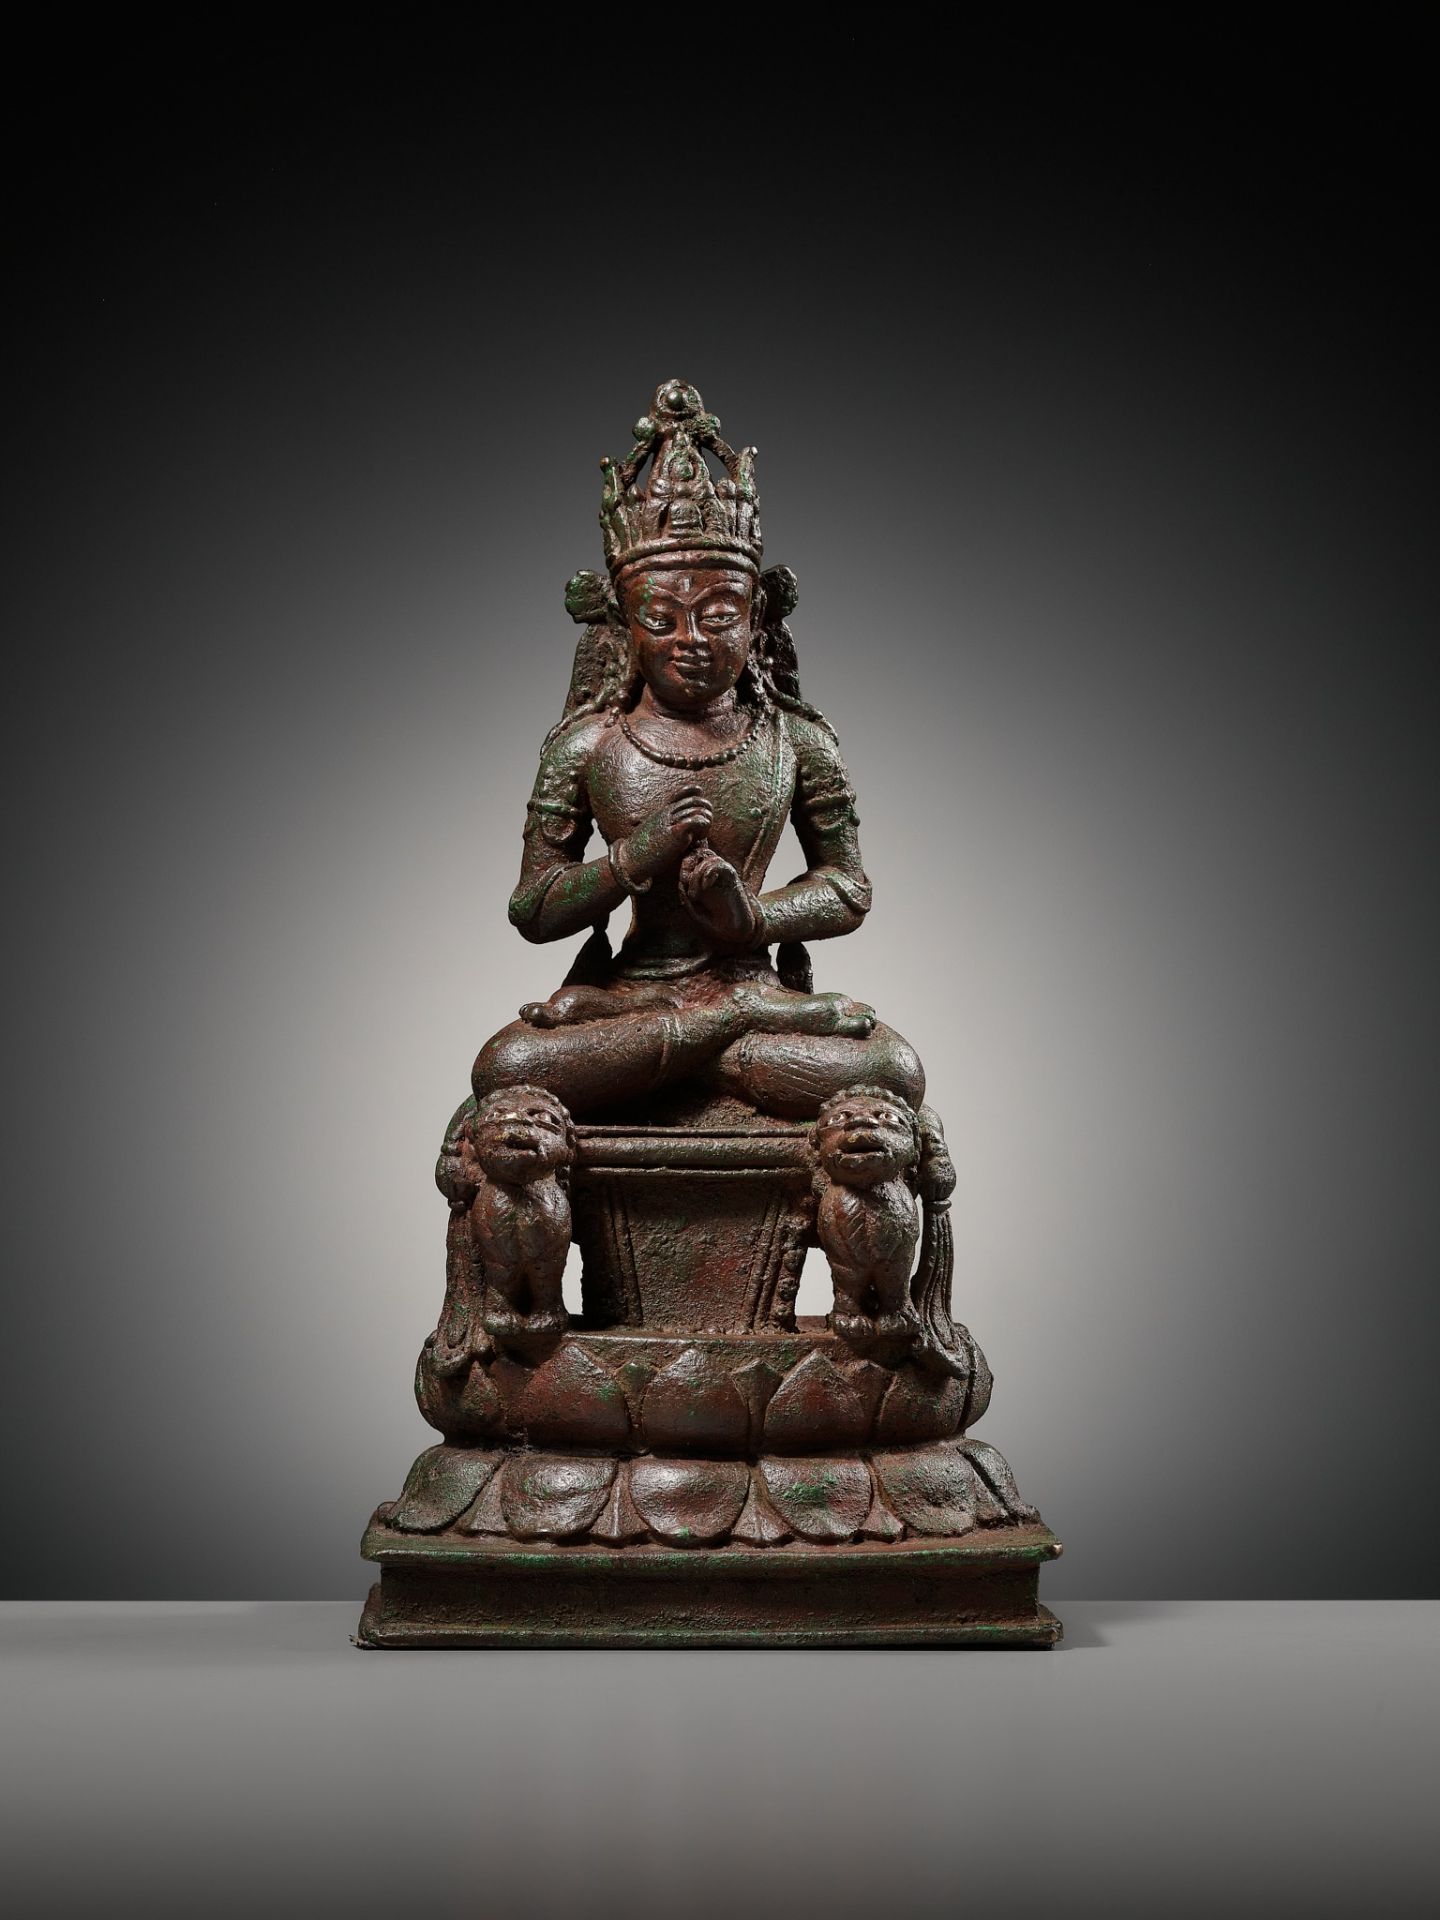 A SILVER-INLAID BRONZE FIGURE OF BUDDHA VAIROCANA, SWAT-VALLEY, 7TH-8TH CENTURY - Image 16 of 17